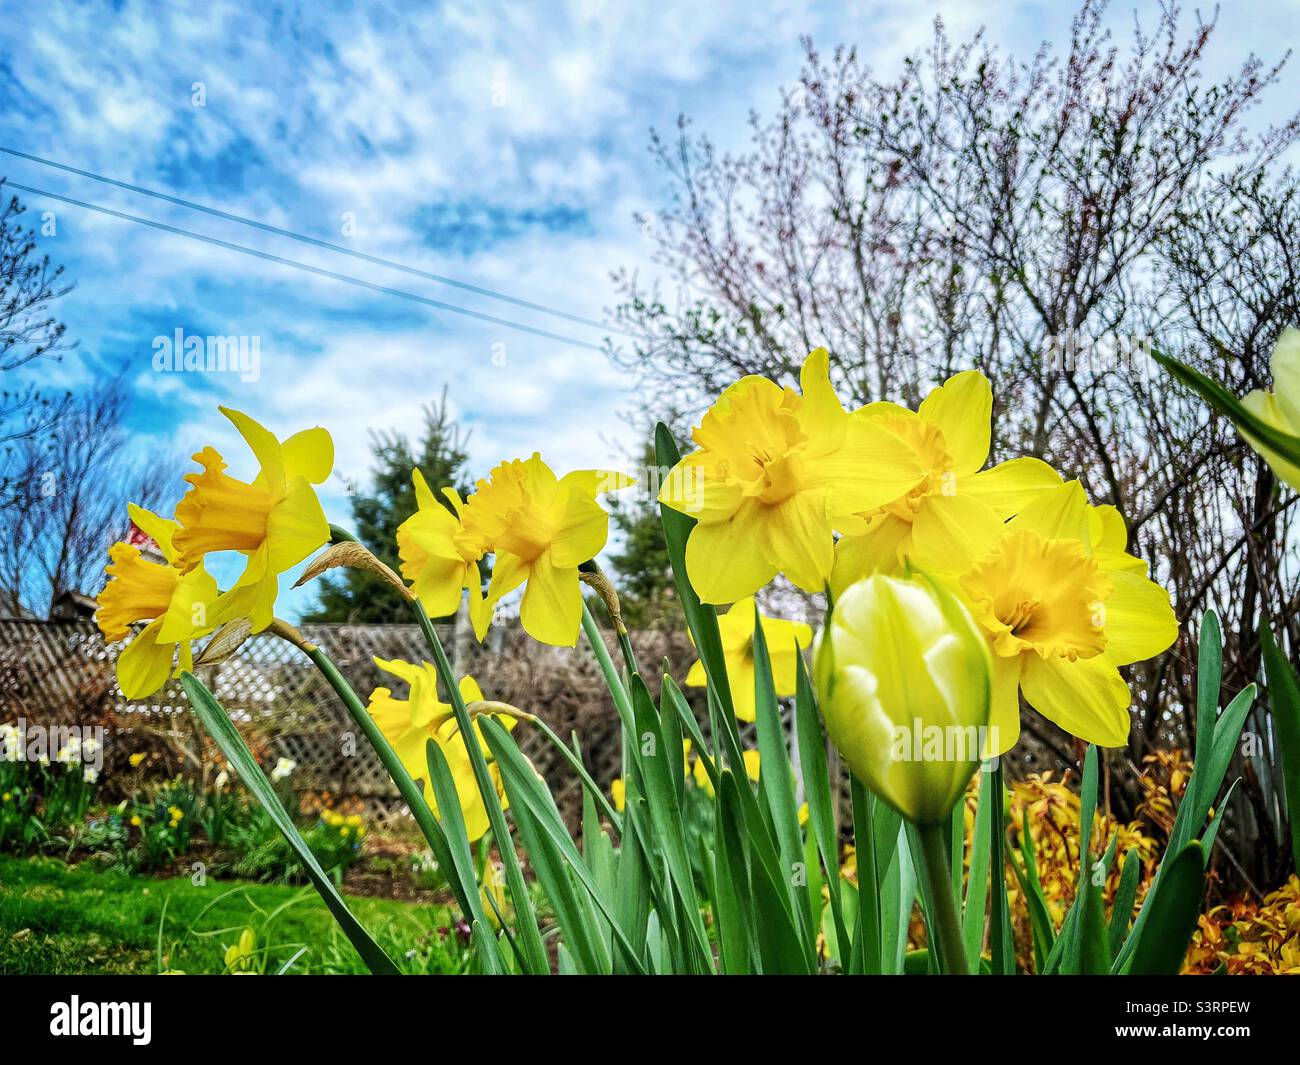 Flower bed full of yellow daffodils. Stock Photo